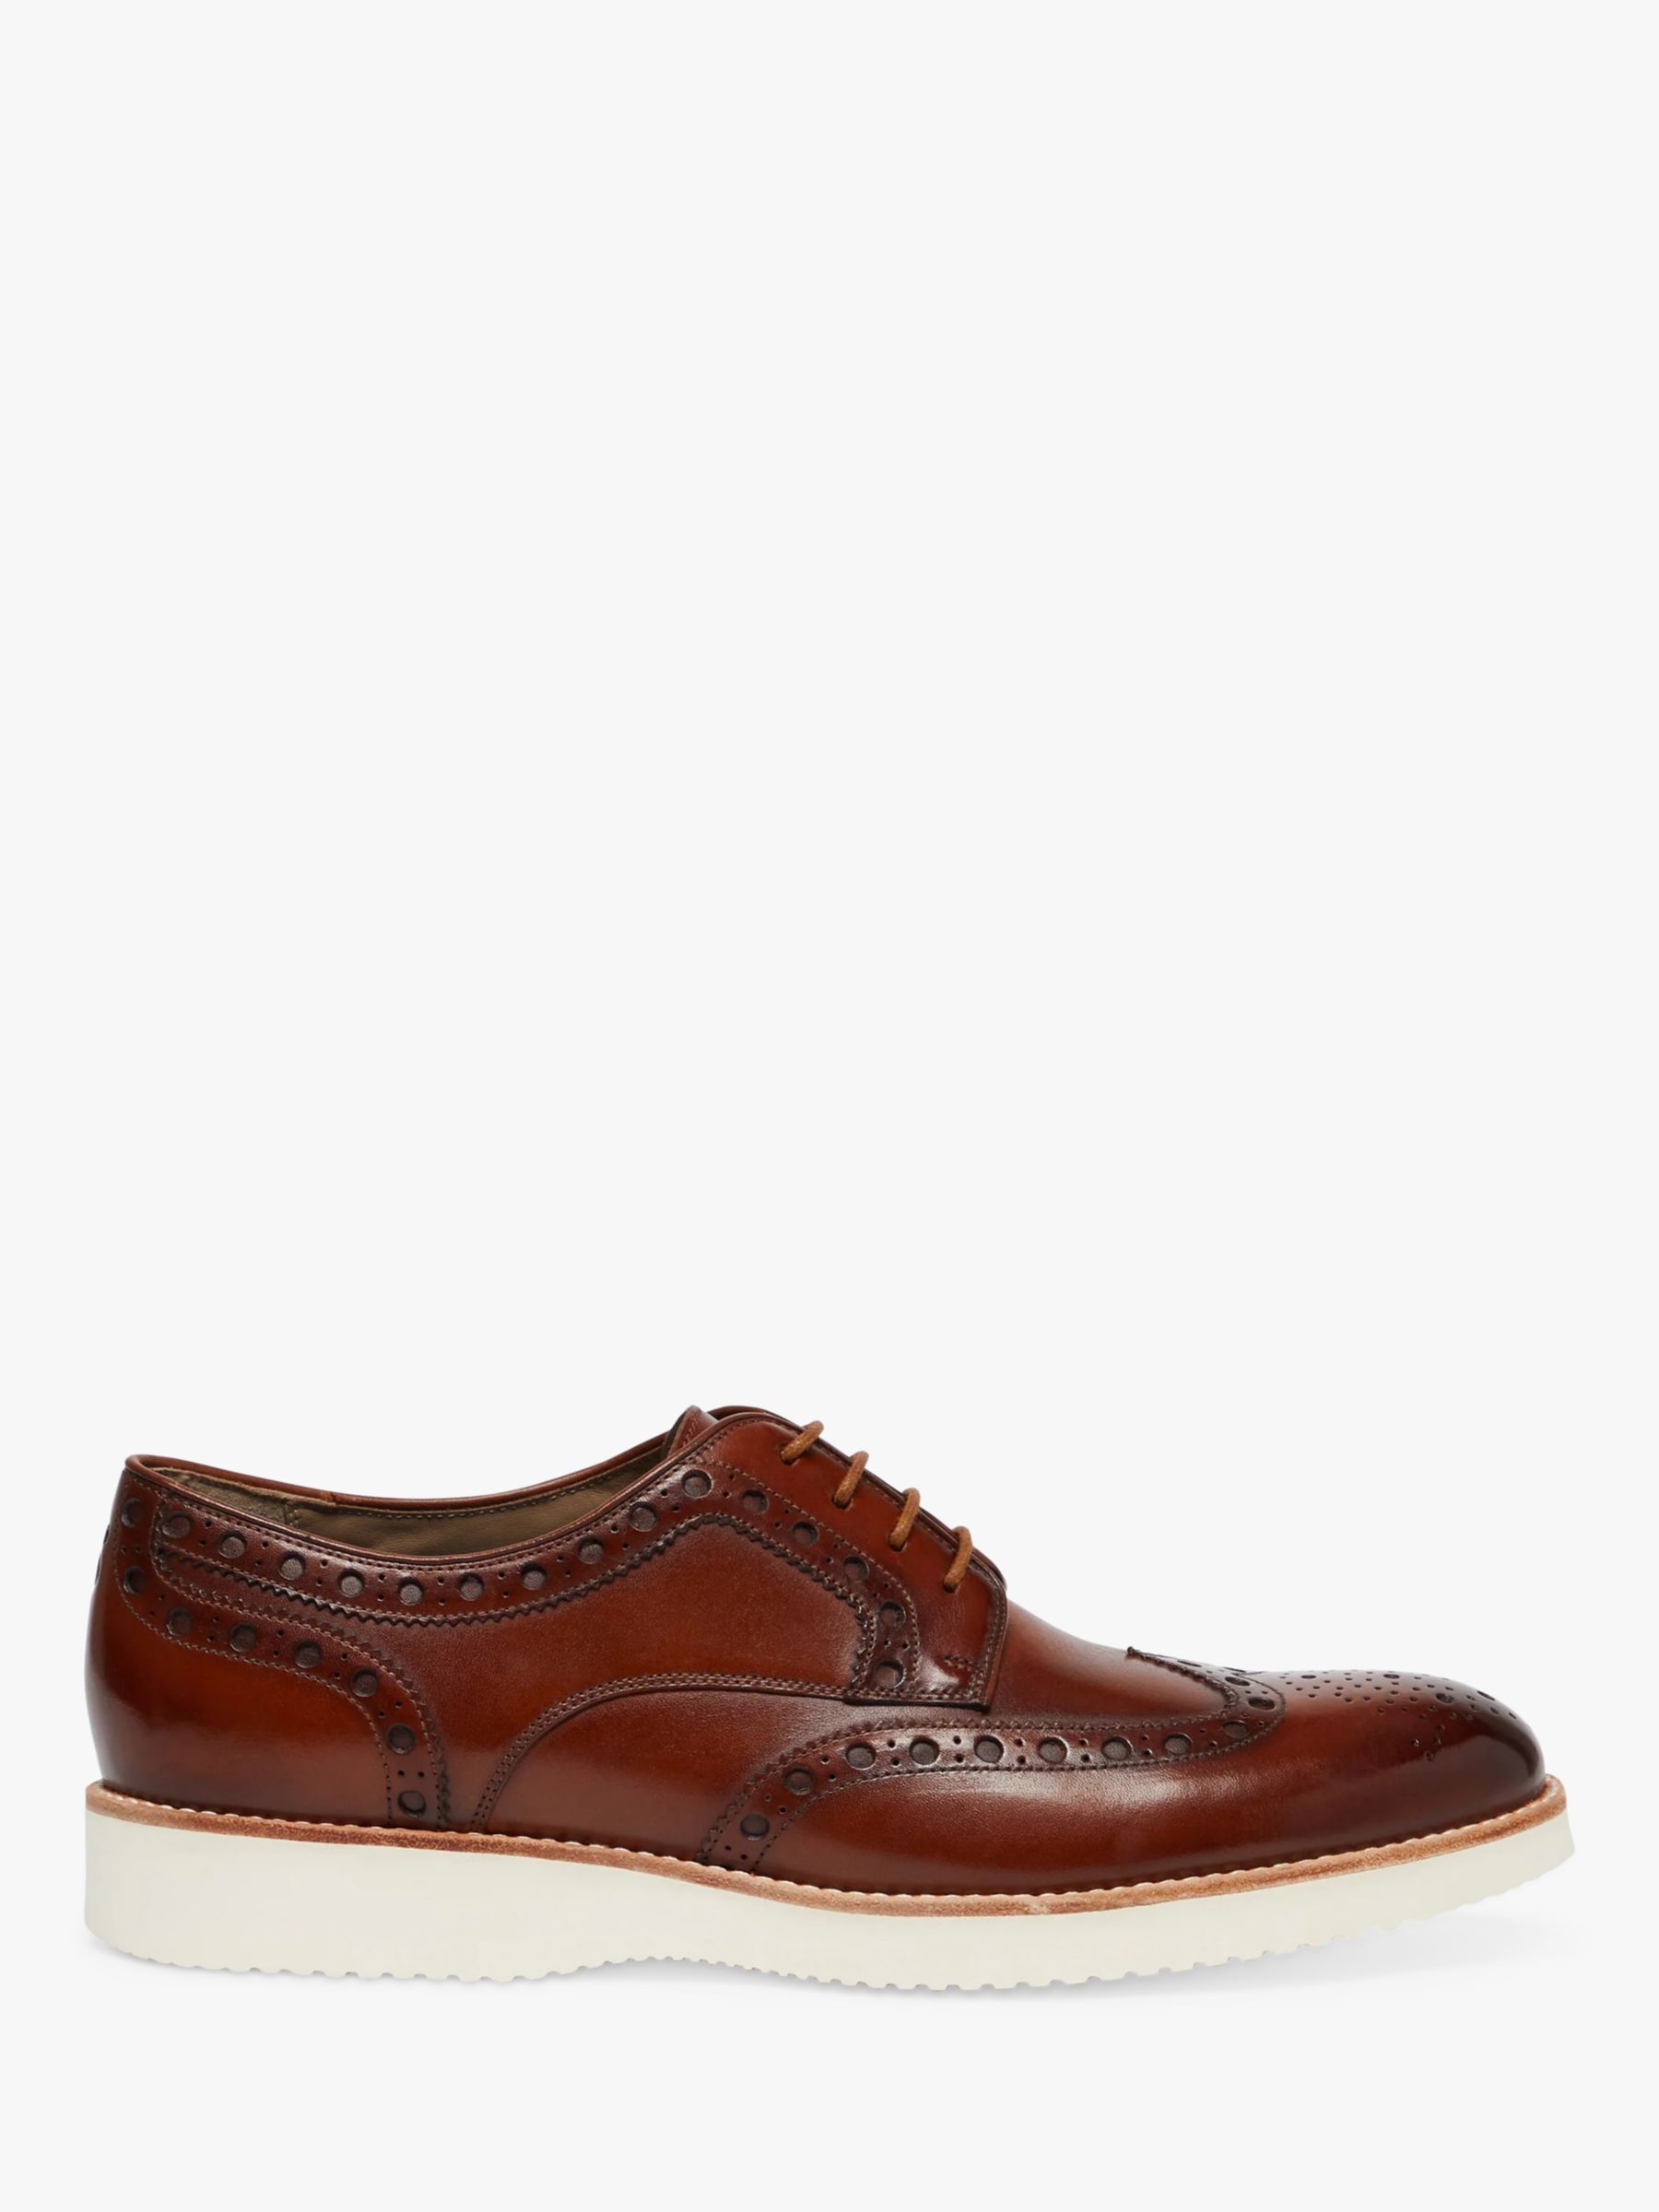 Oliver Sweeney Baberton Leather Brogue Derby Shoes, Tan